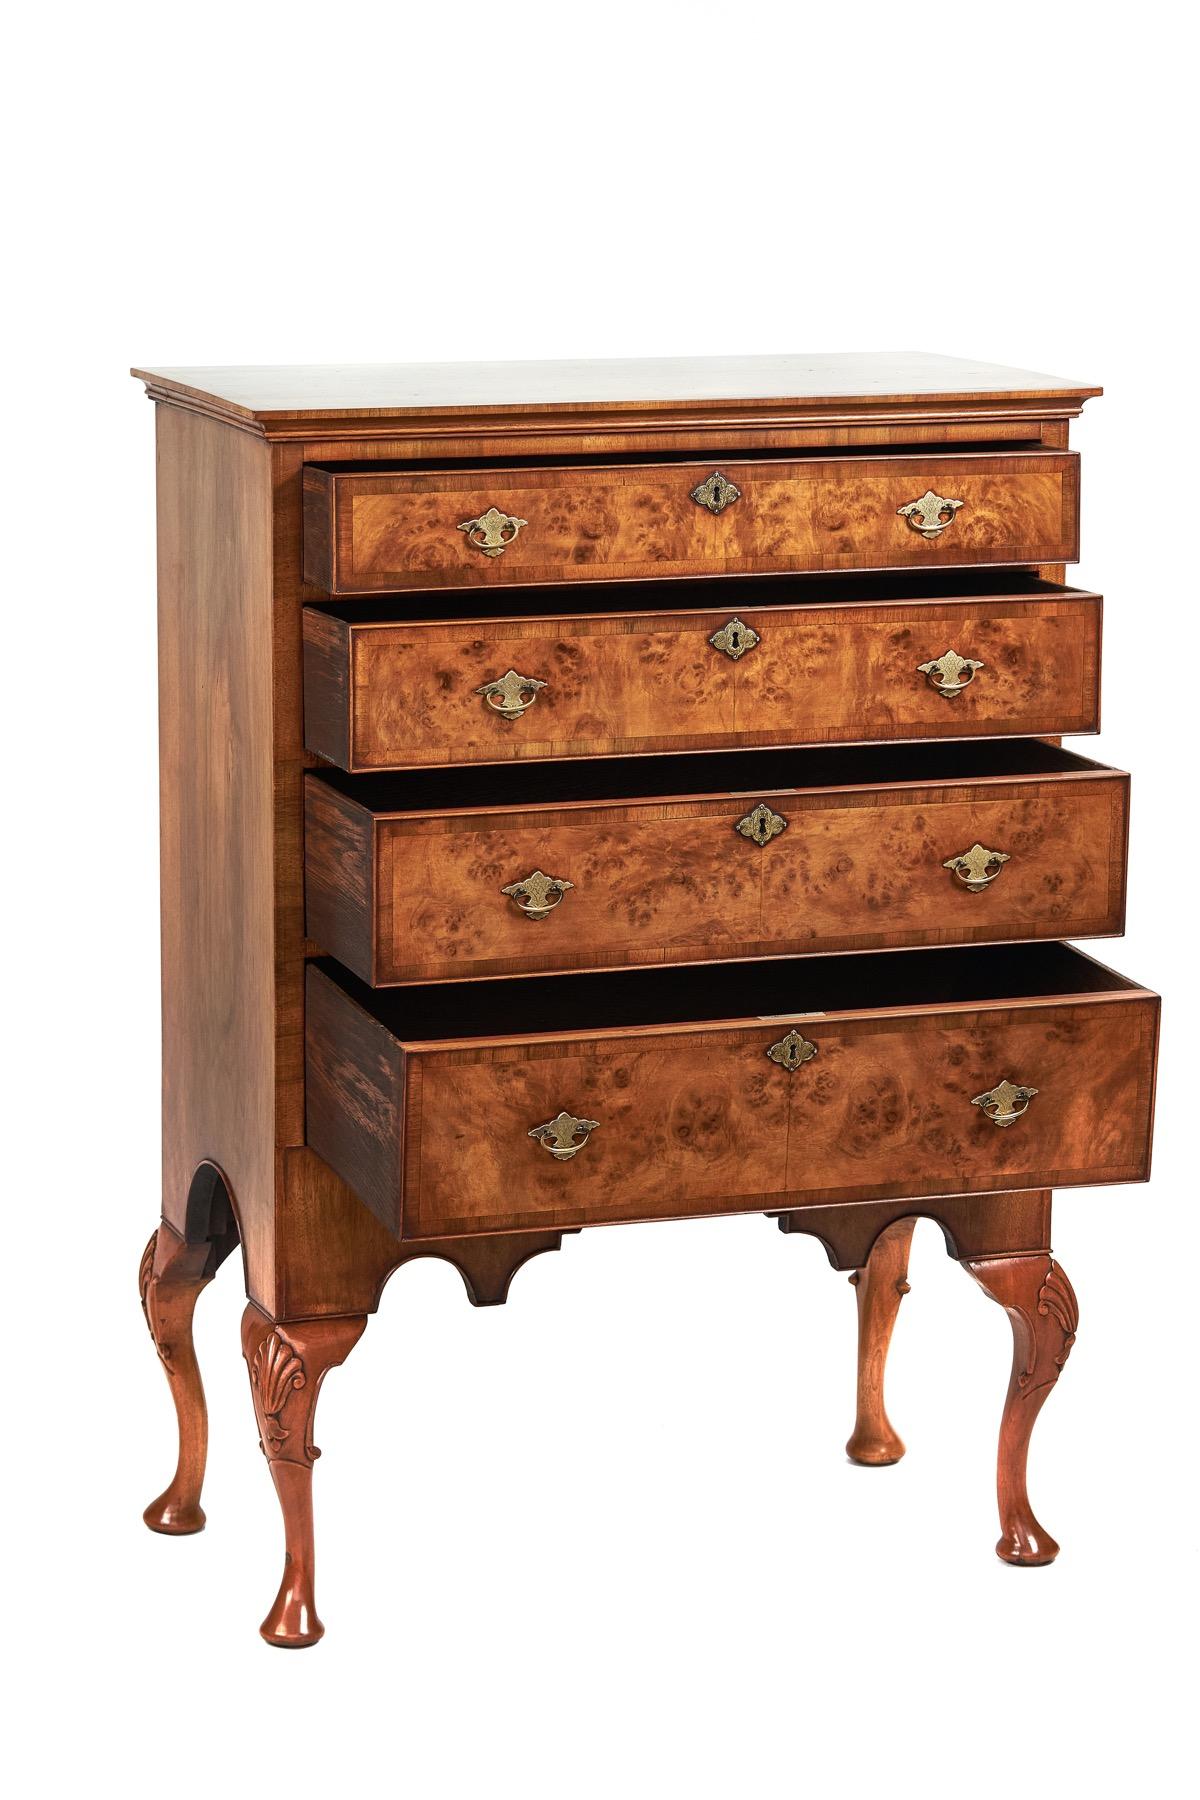 Fine Burr Walnut Revival 4 drawer chest circa 1920s
In the Manner of Queen Anne & George 1st
Burr Walnut Quarter veneer on top with cross banding,
4 Burr Walnut Graduated Drawers, with cock beading edges,
Oak Lined Drawers, 
Period Design Brass